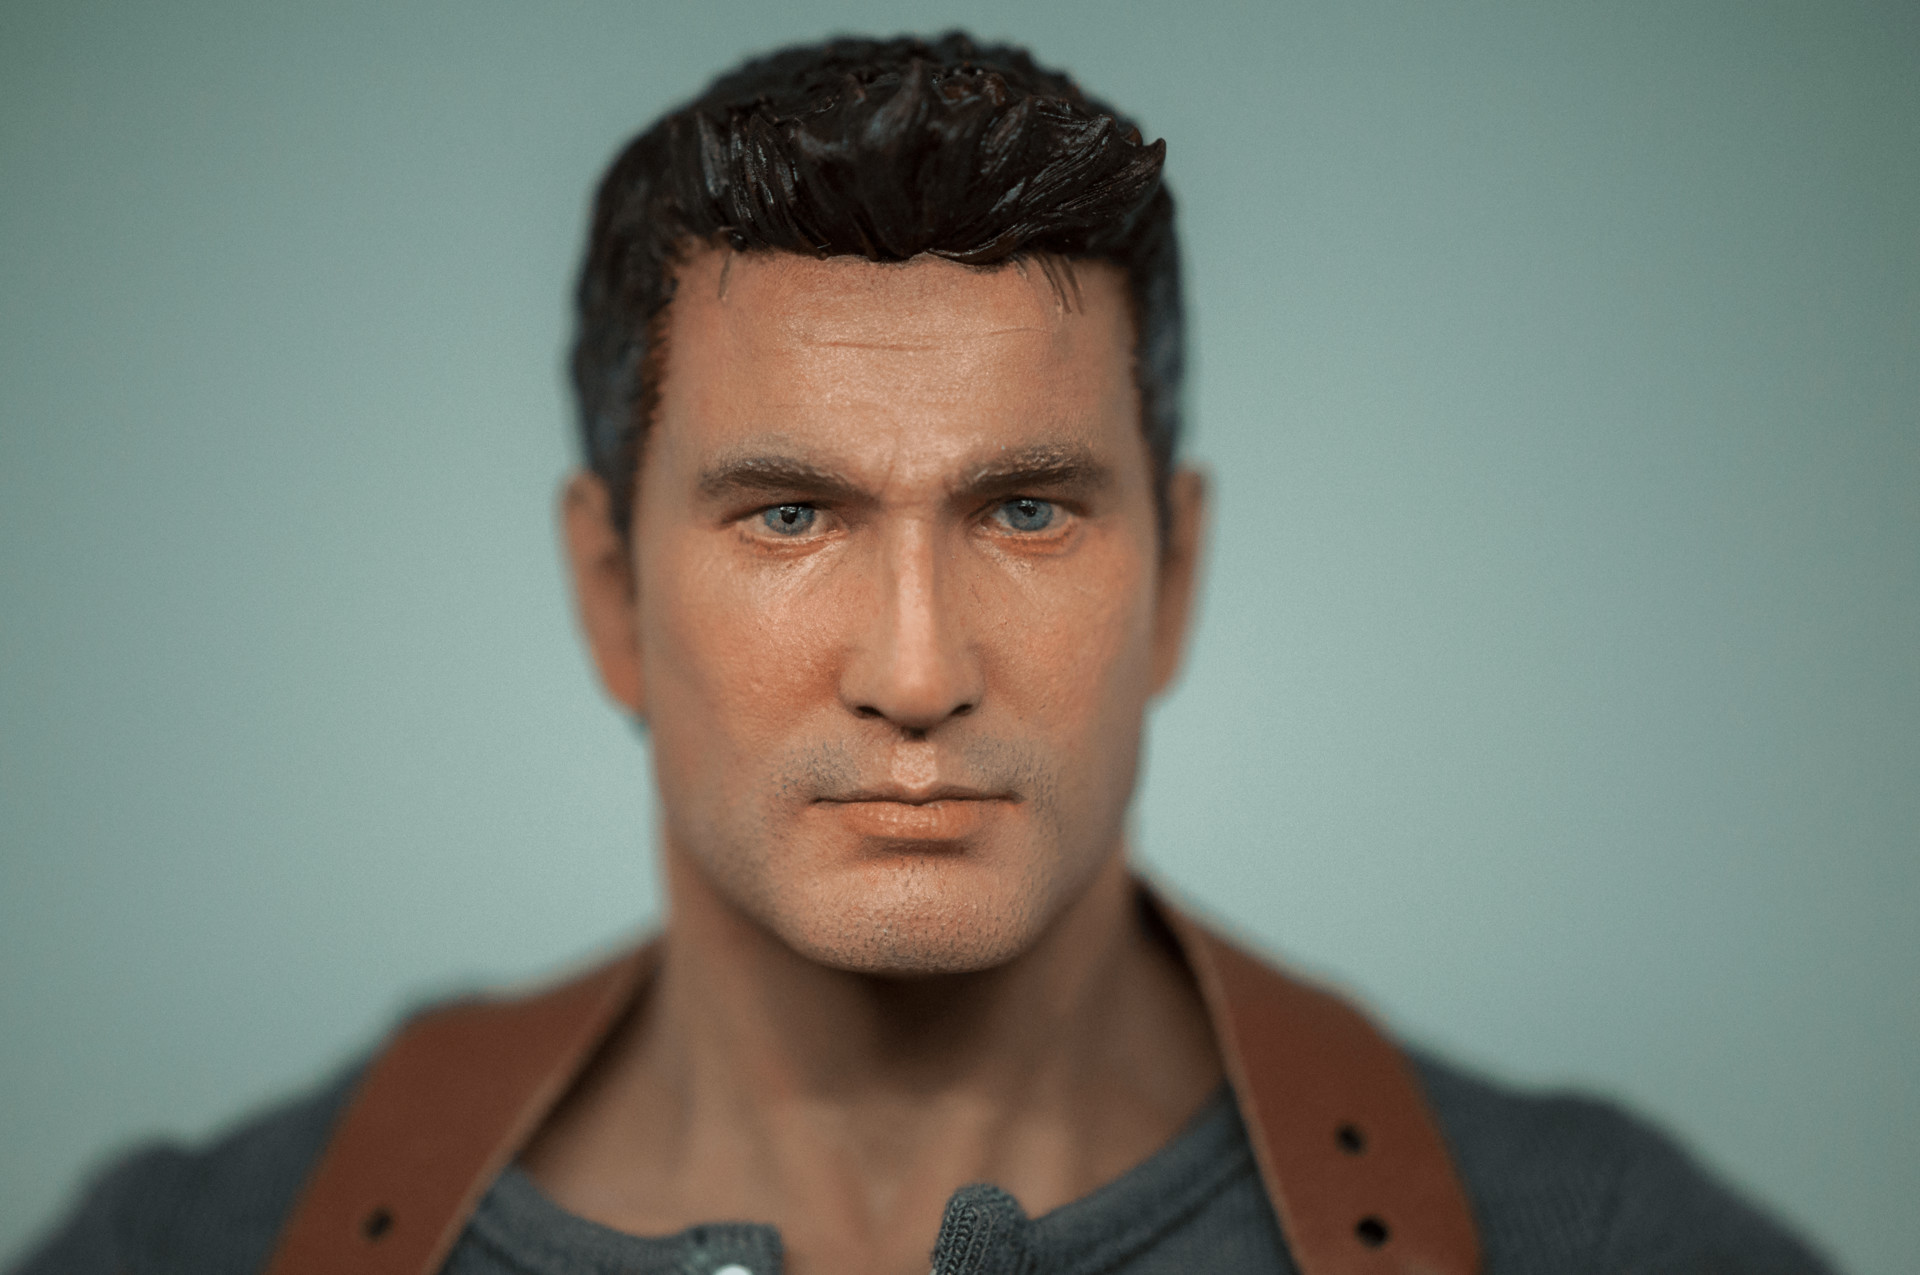 Nathan Drake Uncharted - ZBrushCentral